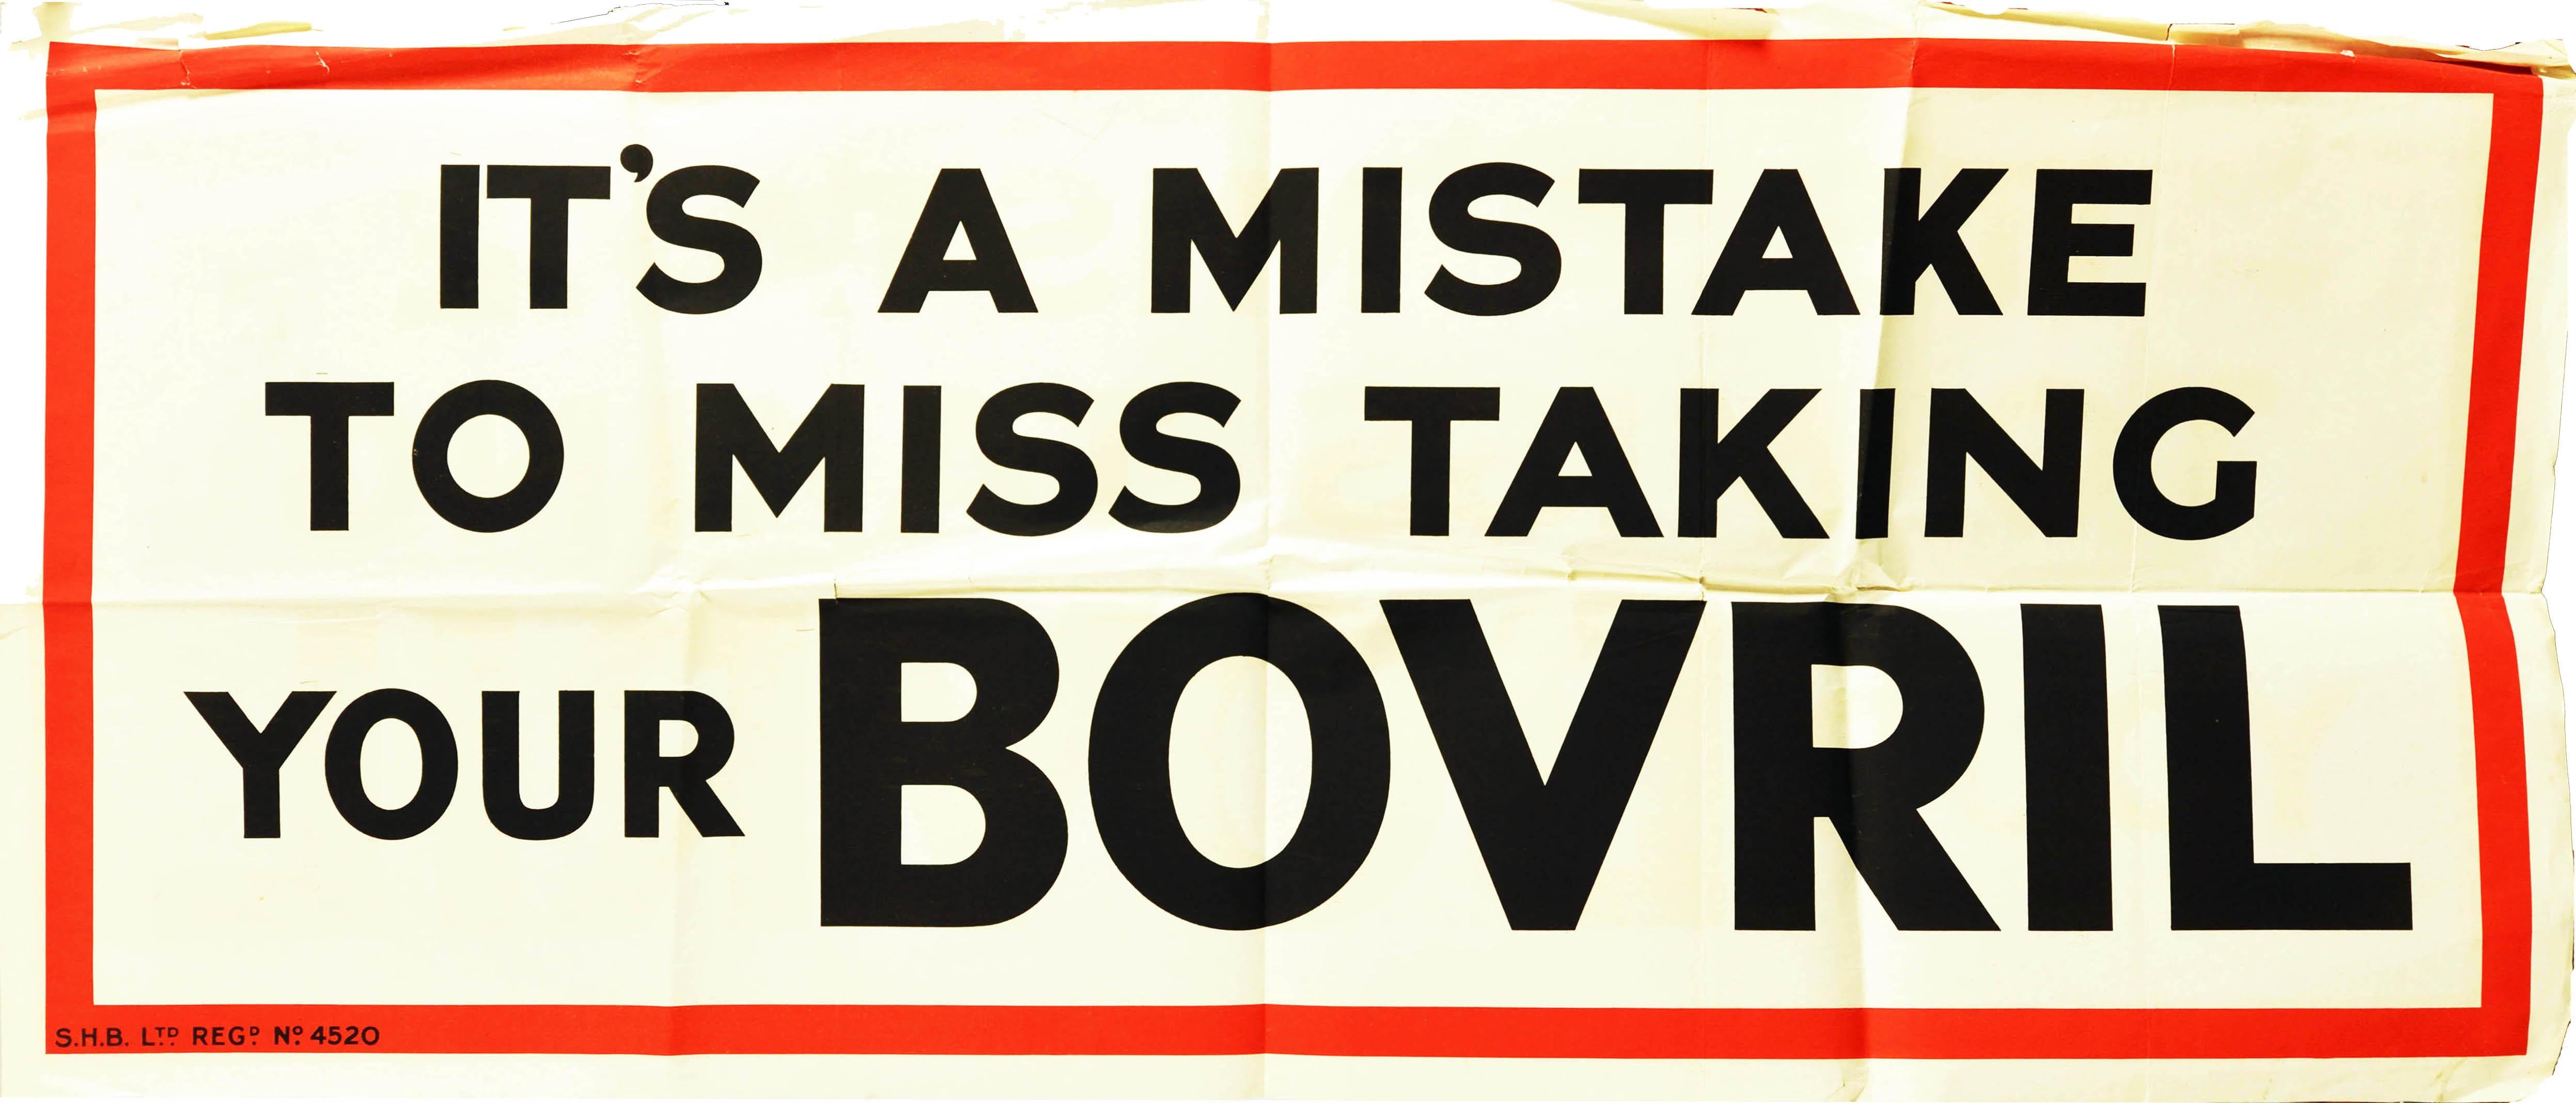 Unknown Print - Original Vintage Poster It's A Mistake To Miss Taking Your Bovril Hot Drink Food